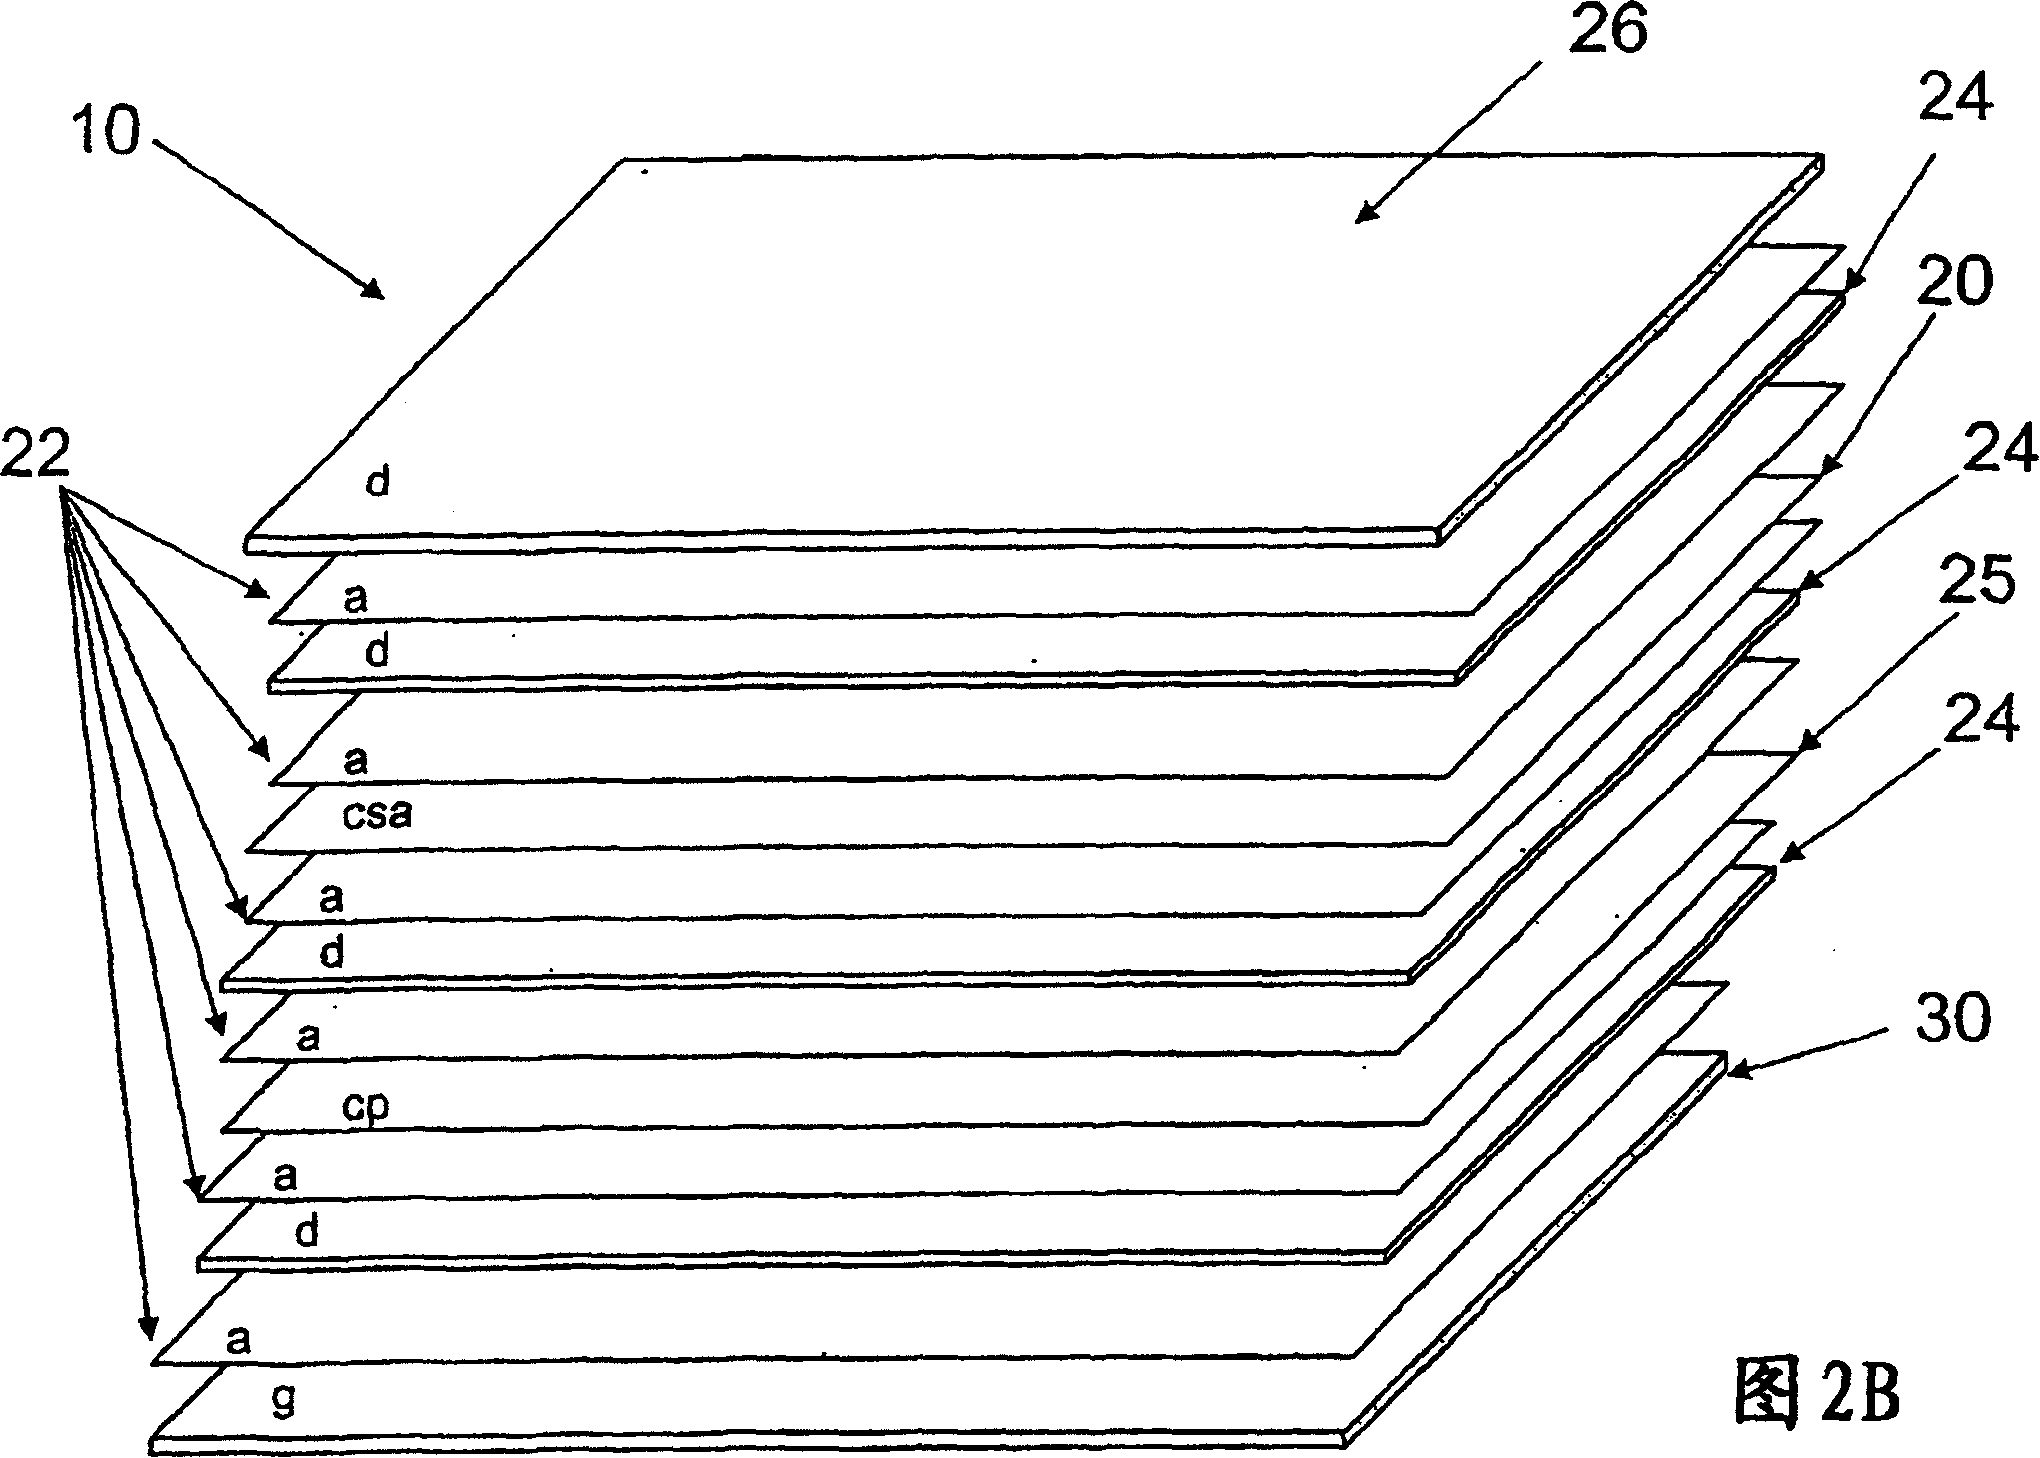 Multi-layer capacitive coupling in phased array antennas